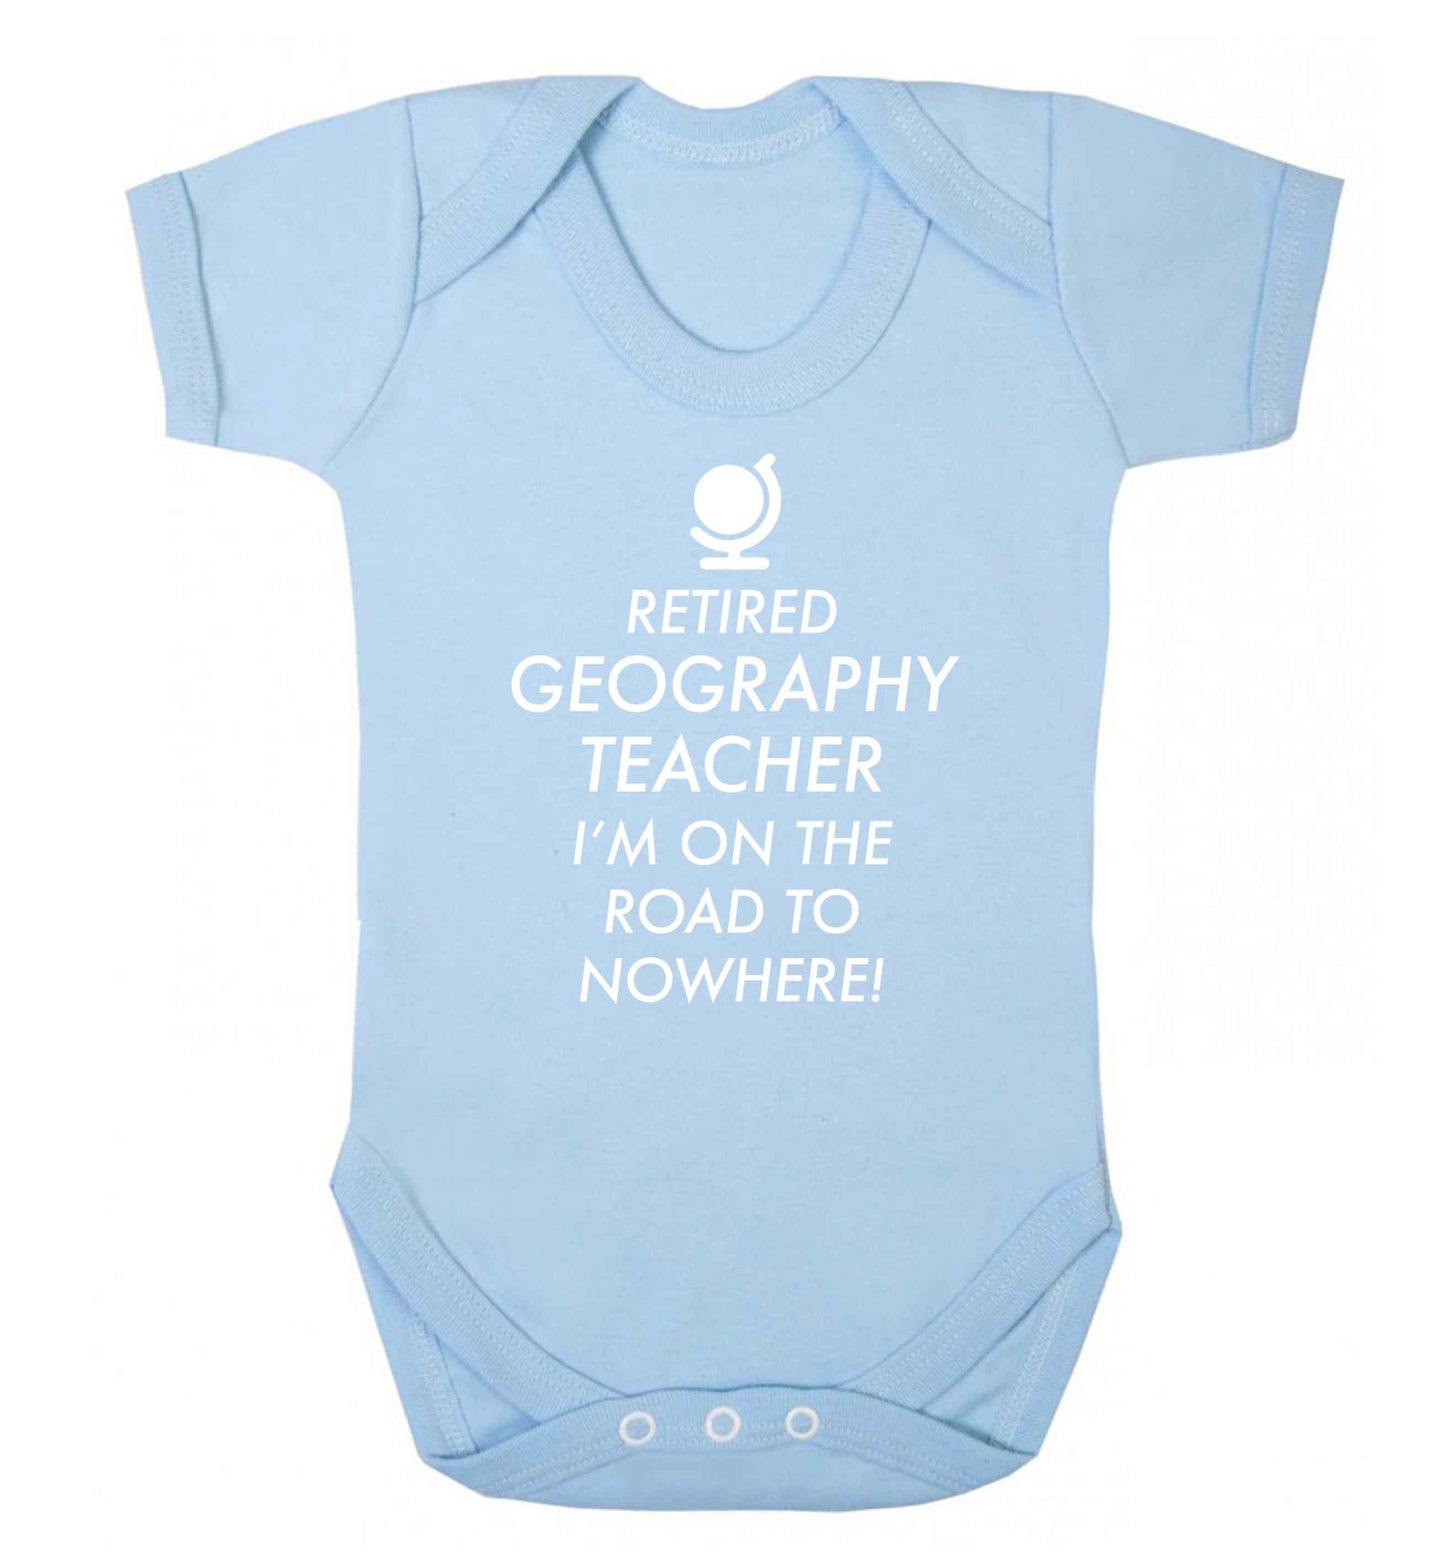 Retired geography teacher I'm on the road to nowhere Baby Vest pale blue 18-24 months